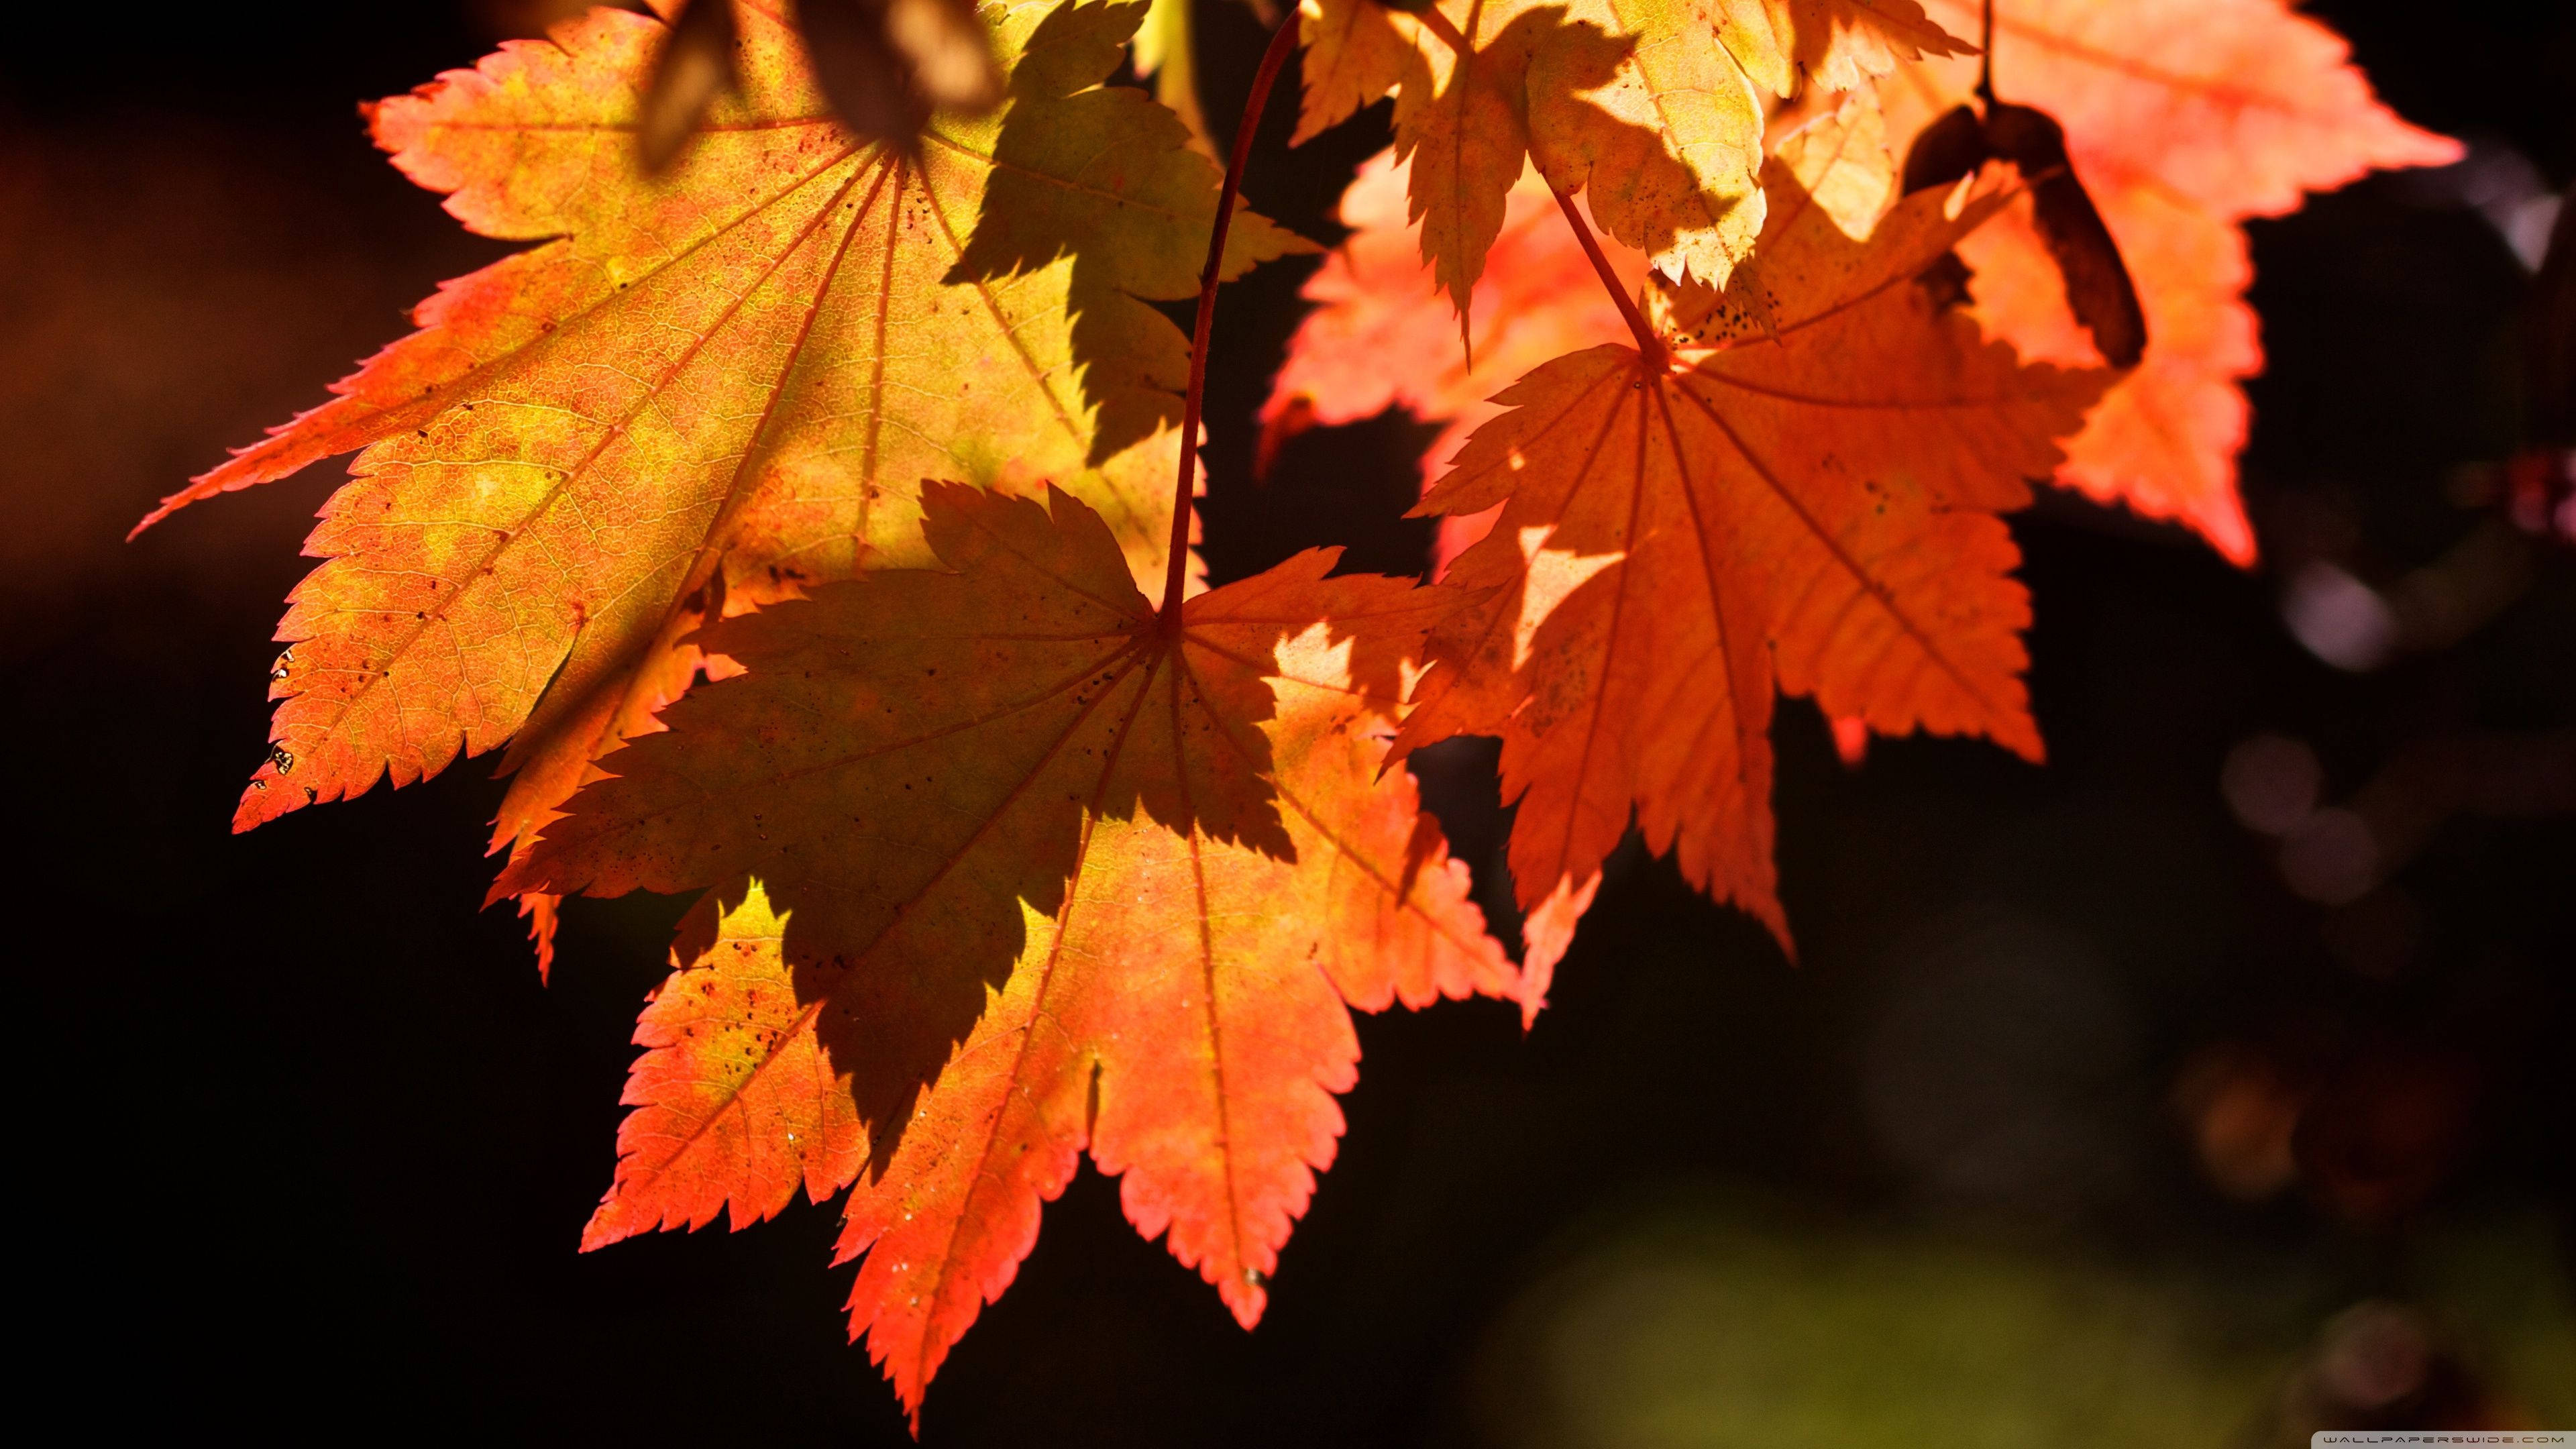 Download Autumn Red Maple Leaves Wallpaper 